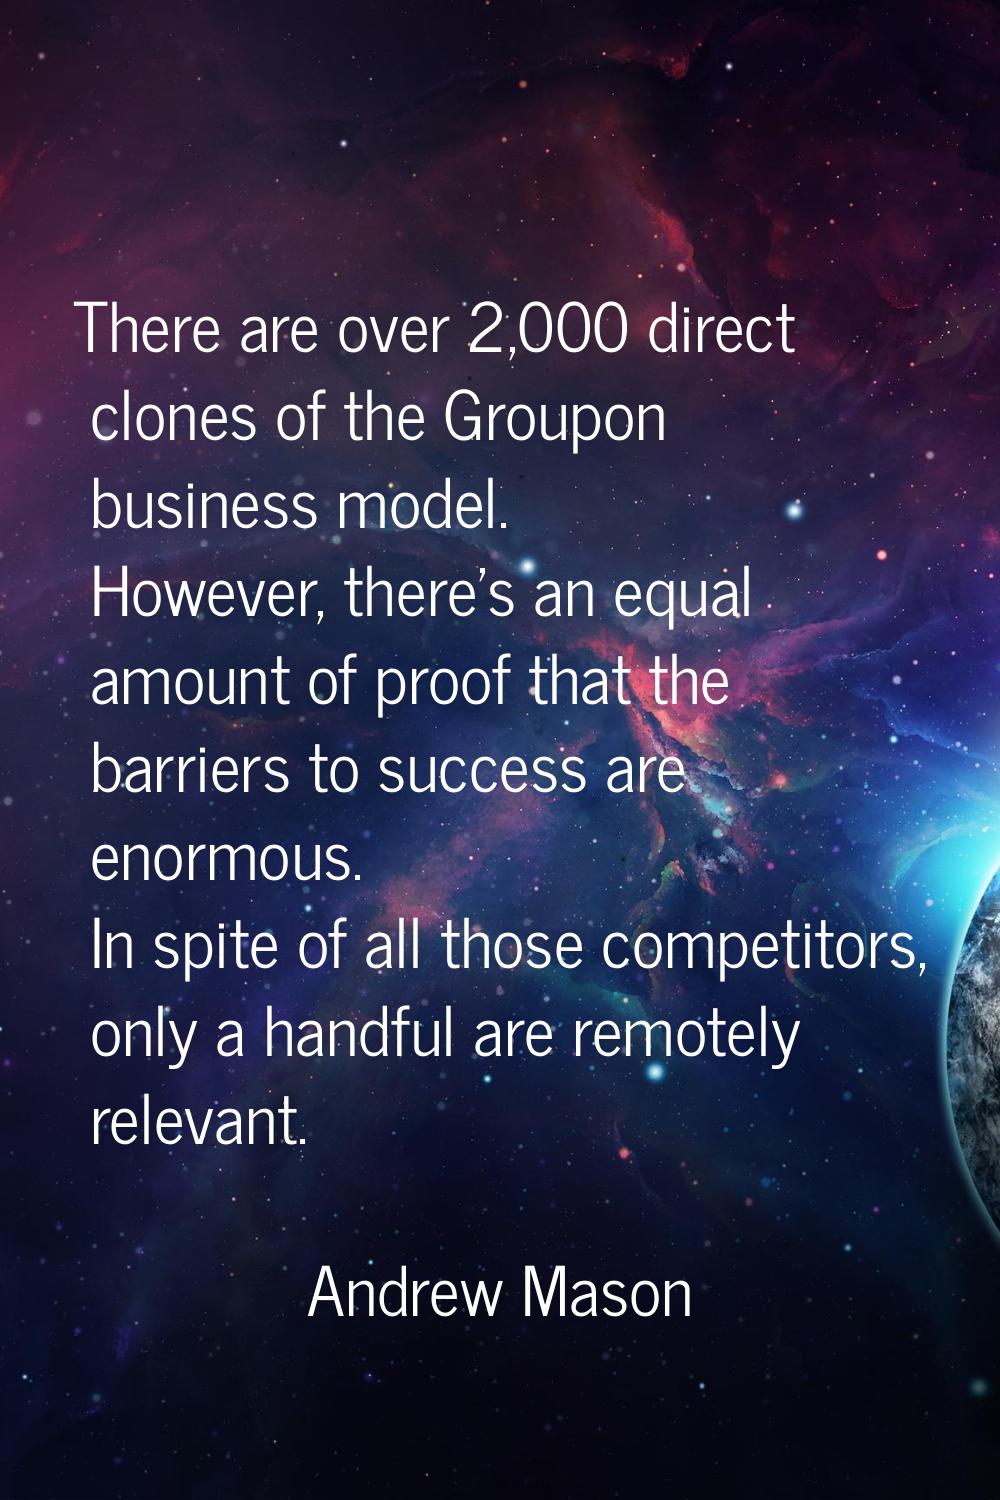 There are over 2,000 direct clones of the Groupon business model. However, there's an equal amount 